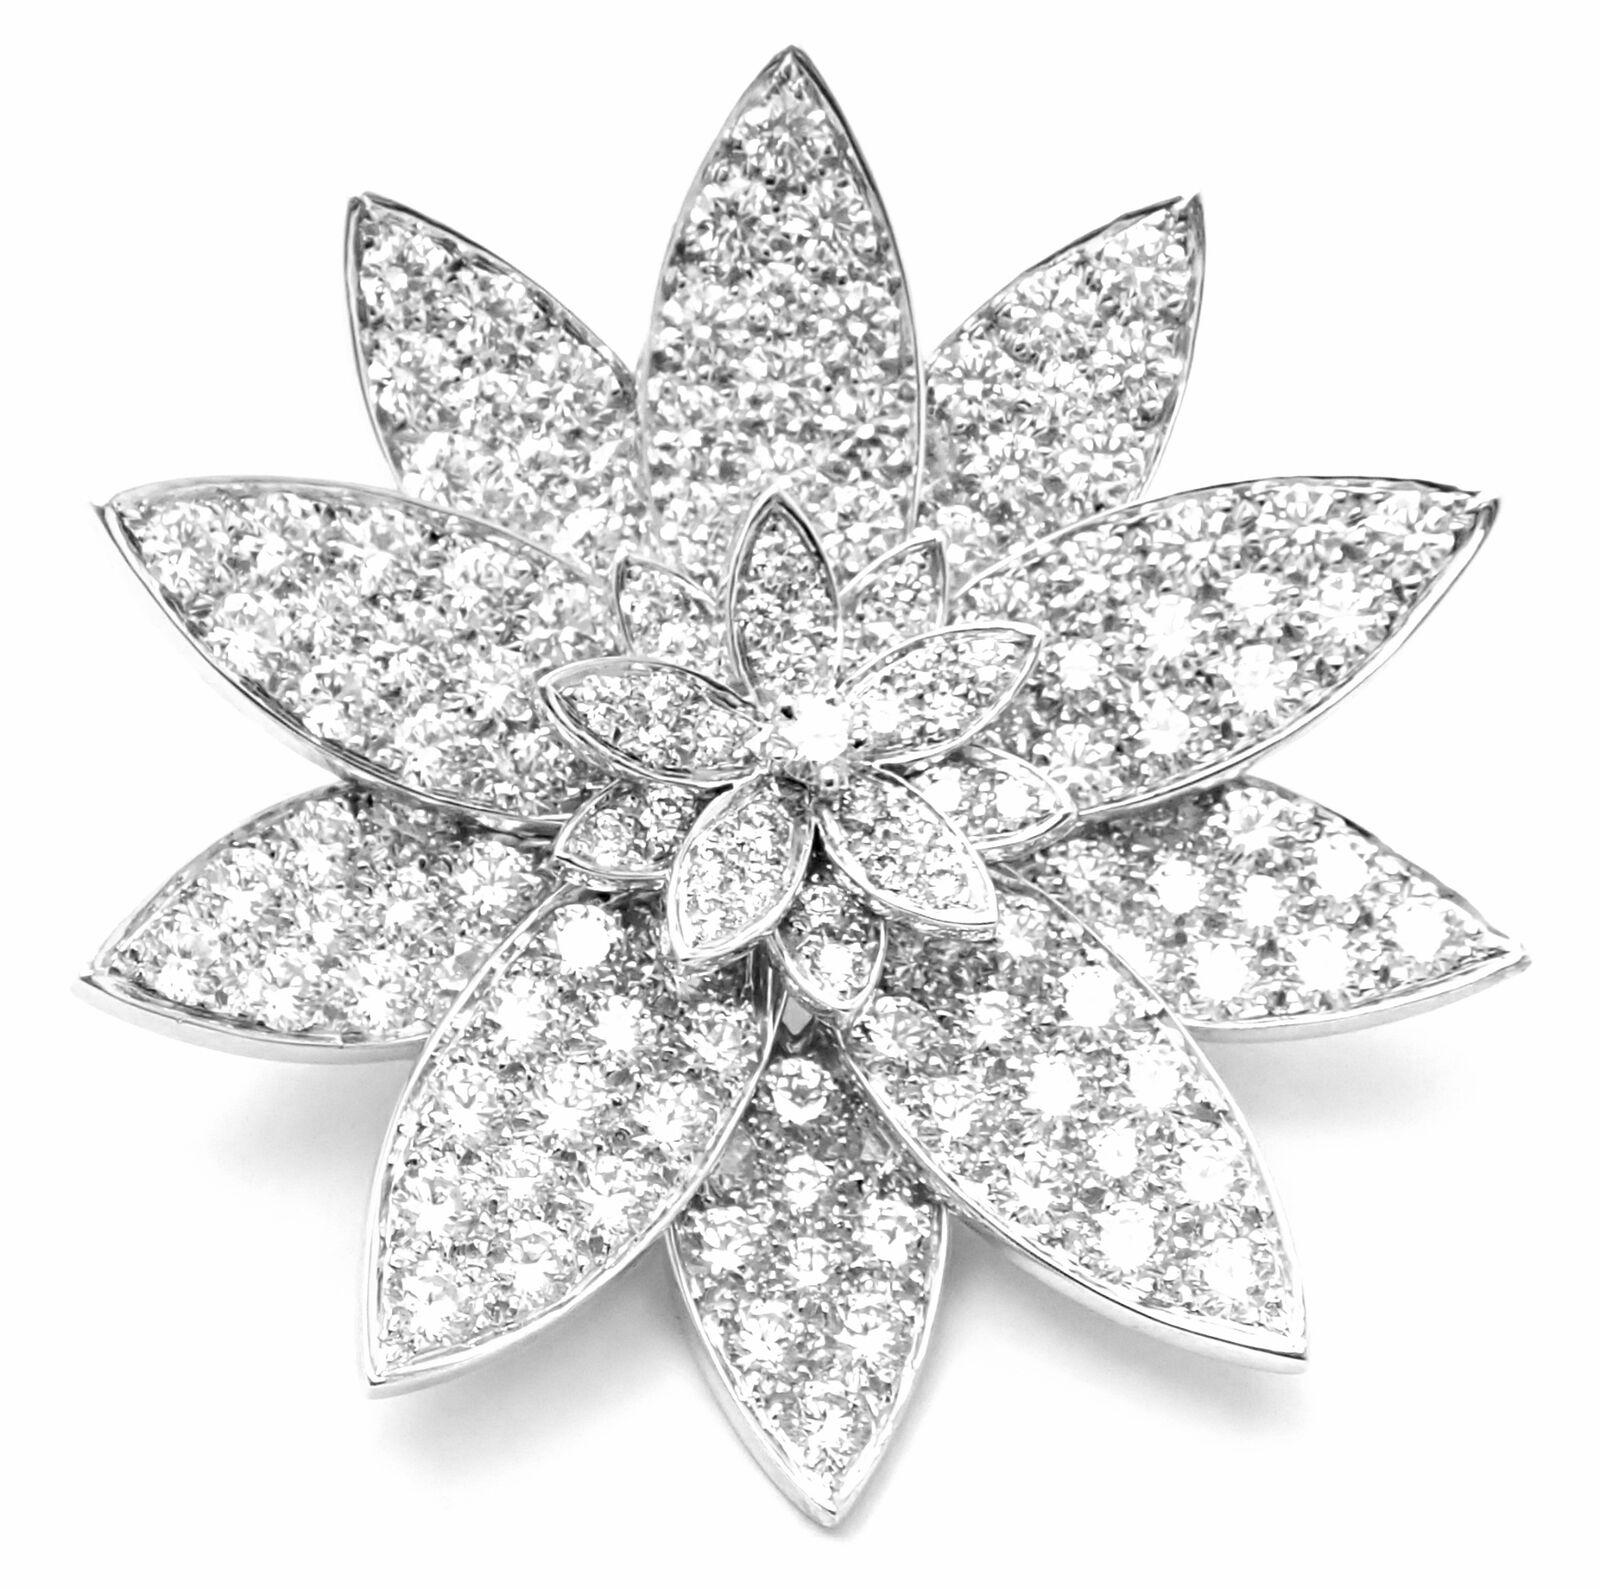 Van Cleef & Arpels Diamond Large Model Lotus White Gold Clip Brooch Pin In Excellent Condition For Sale In Holland, PA